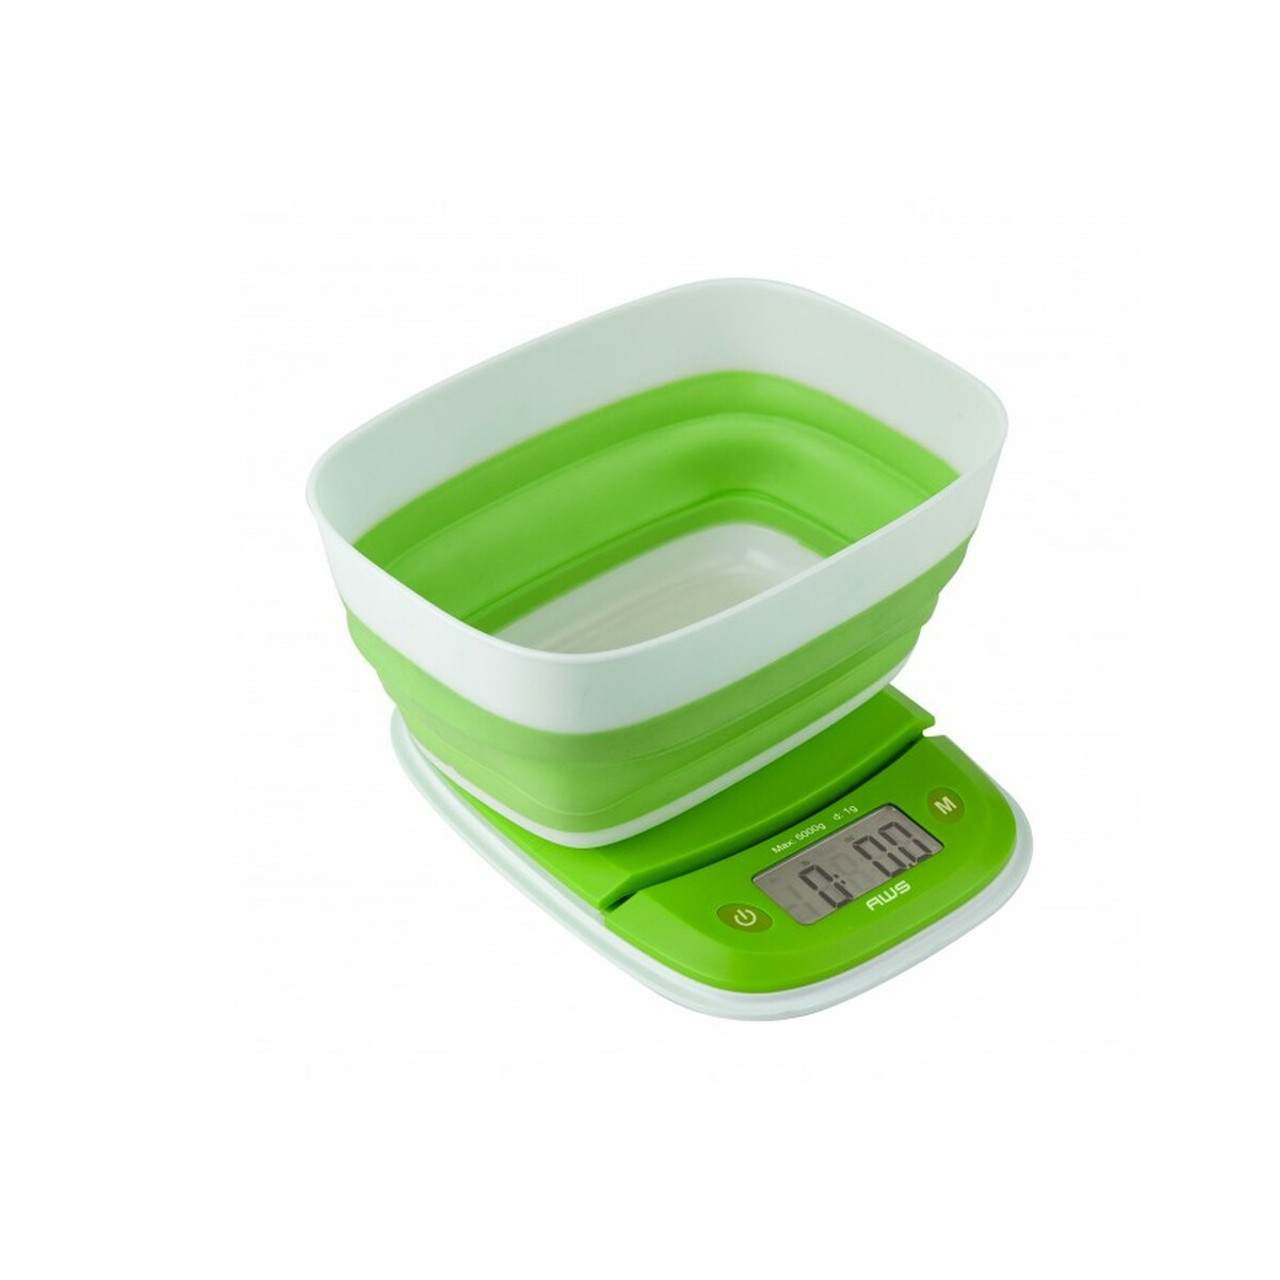 EXTEND-5K DIGITAL KITCHEN SCALE WITH COLLAPSIBLE BOWL - 11LBS X 0.1OZ -  American Weigh Scales